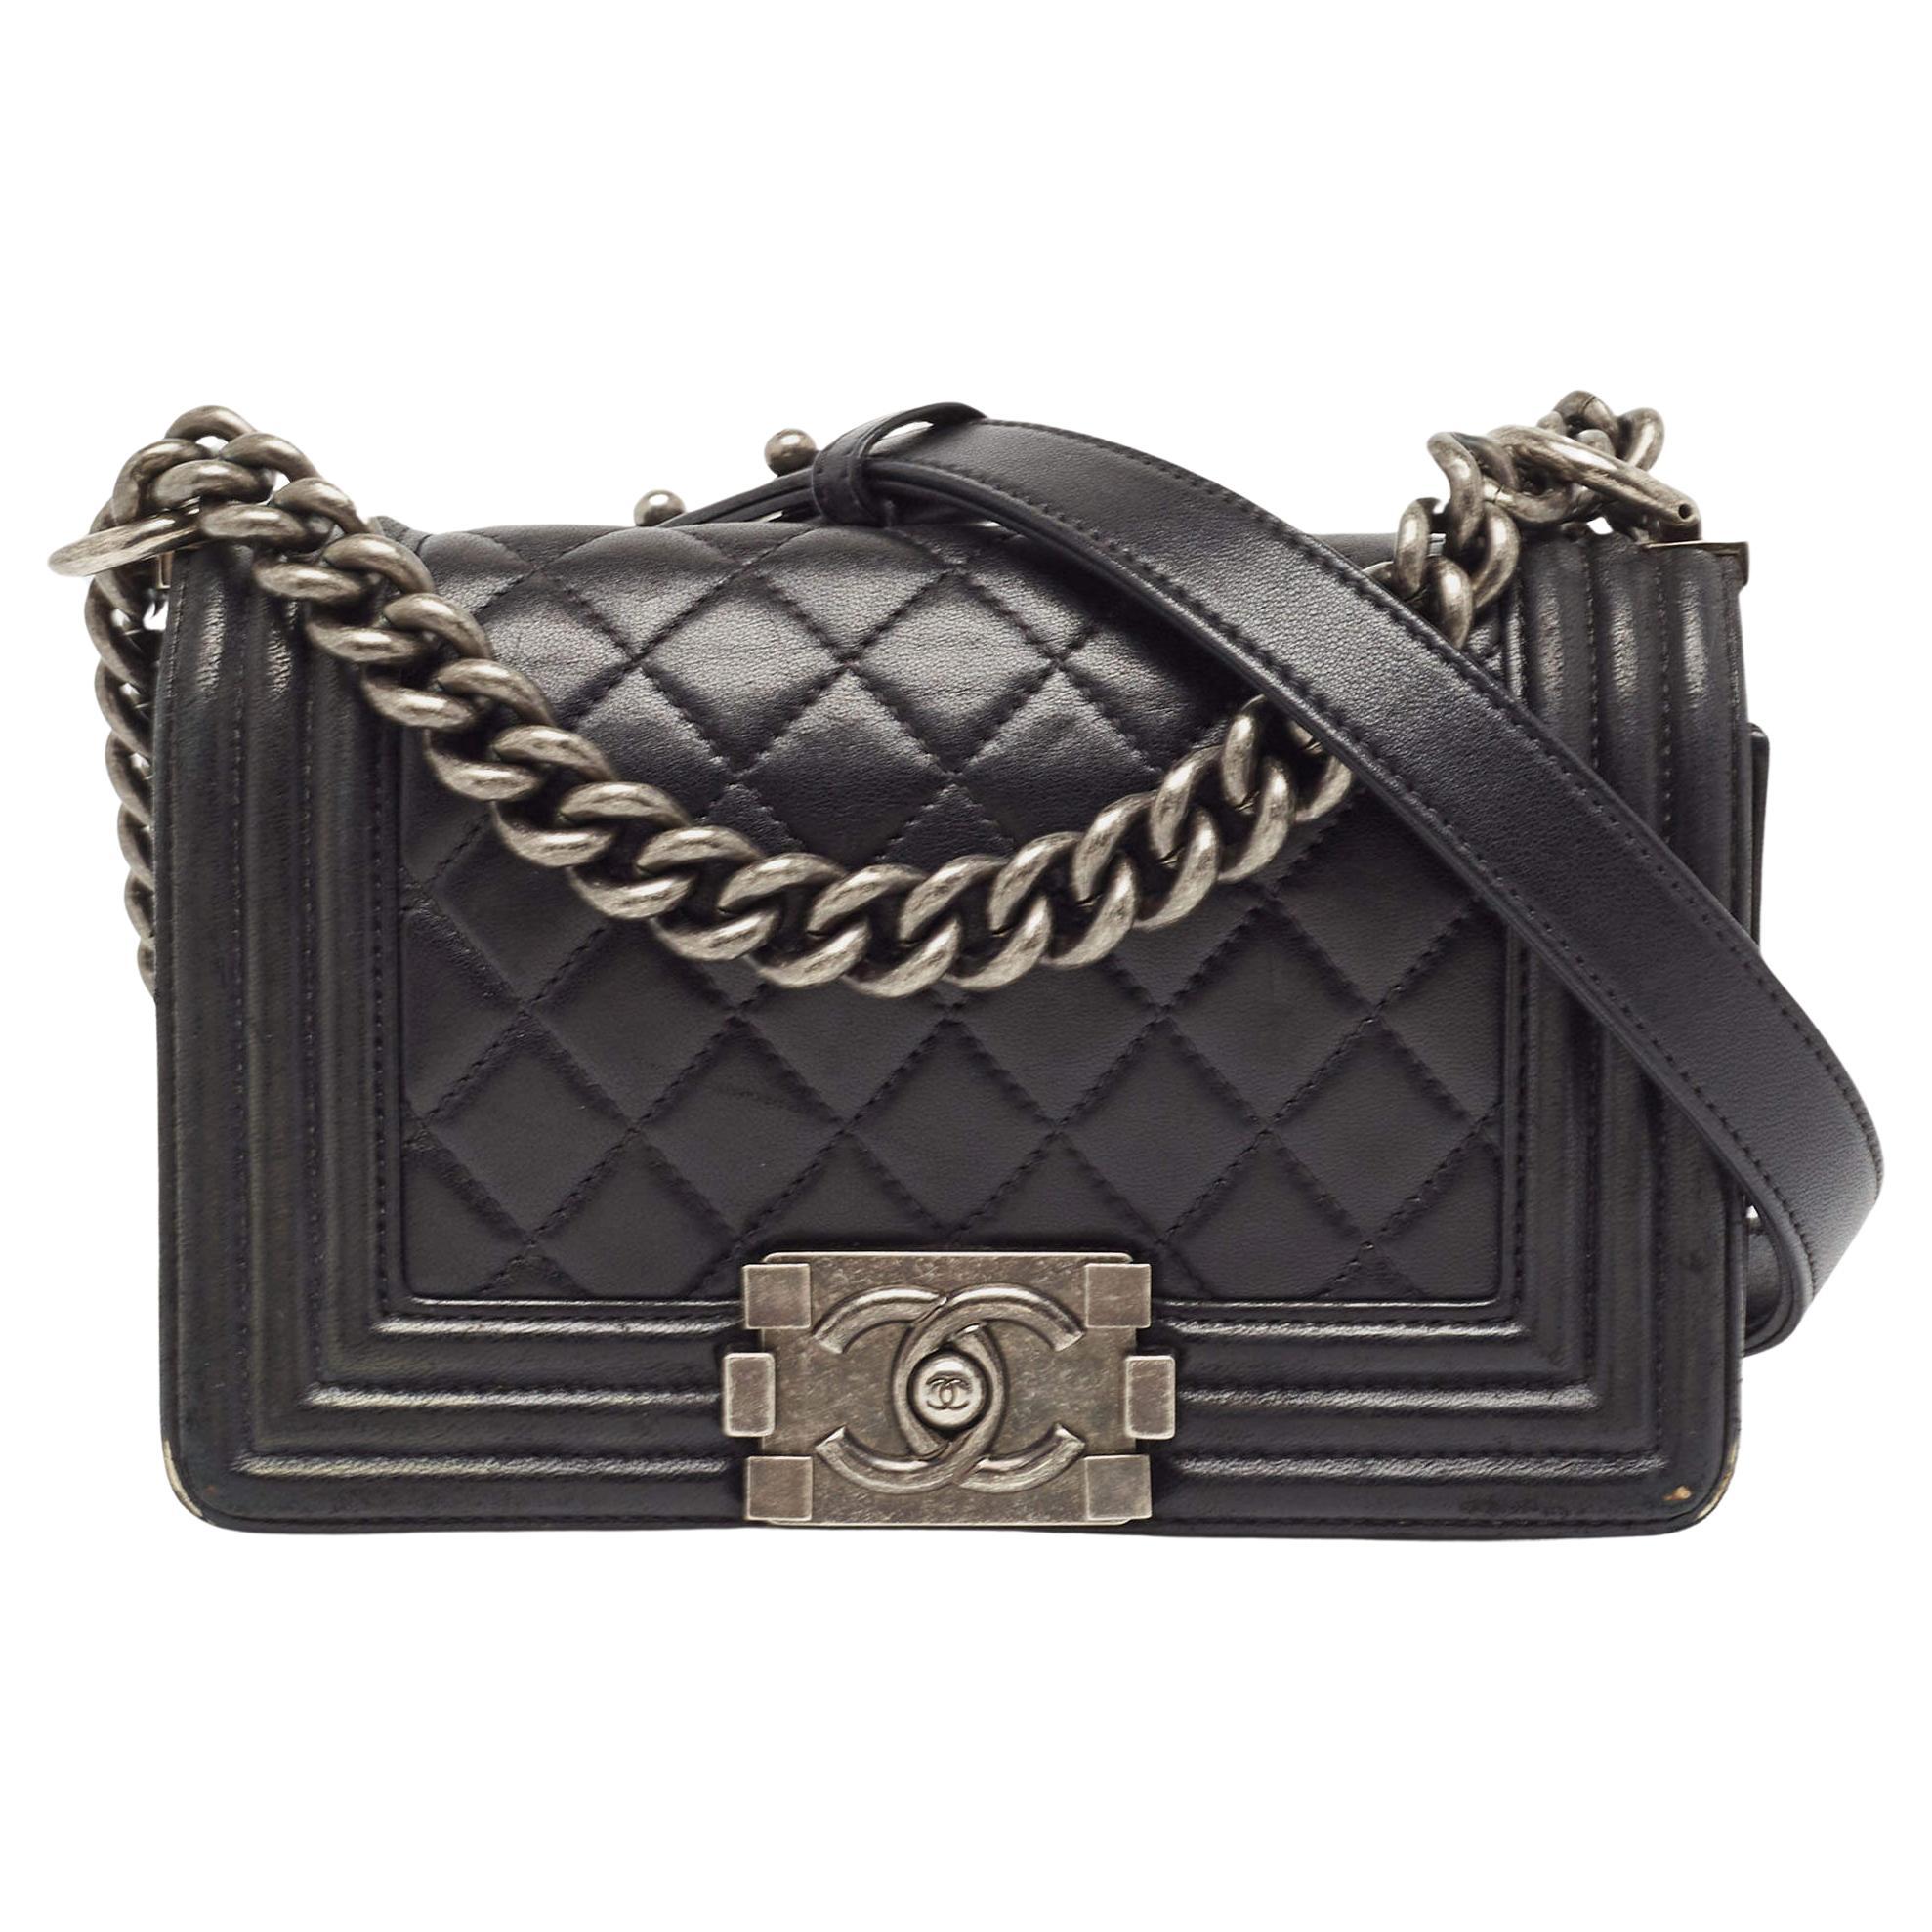 Chanel Black Quilted Leather Small Boy Bag